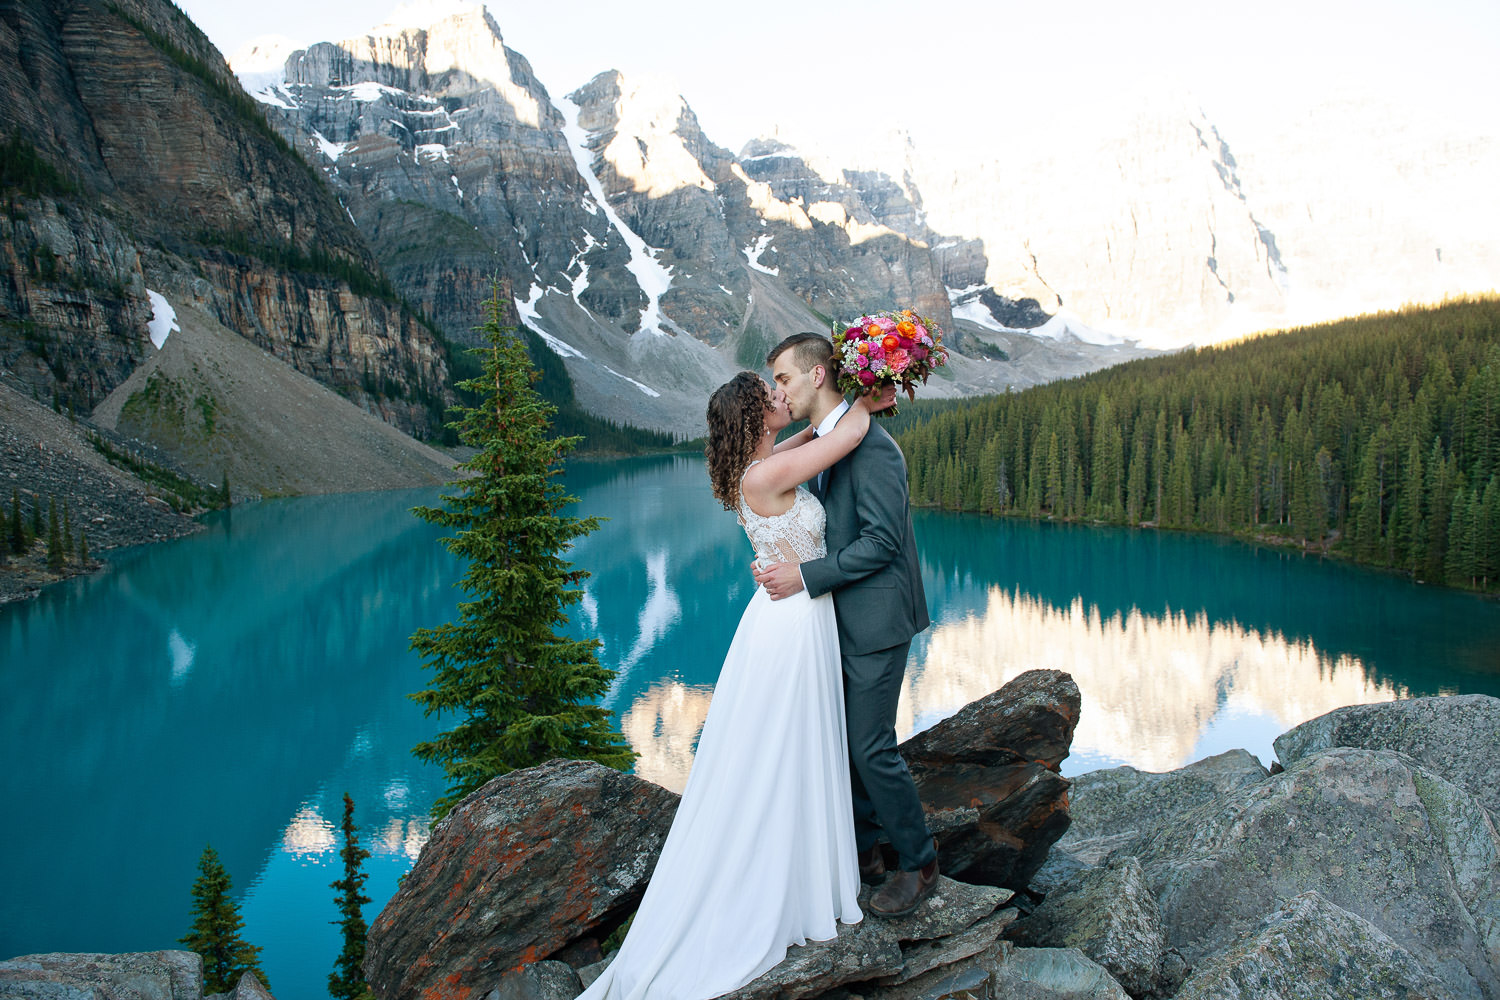 Moraine Lake bride carries a pink bouquet captured by Tara Whittaker Photography